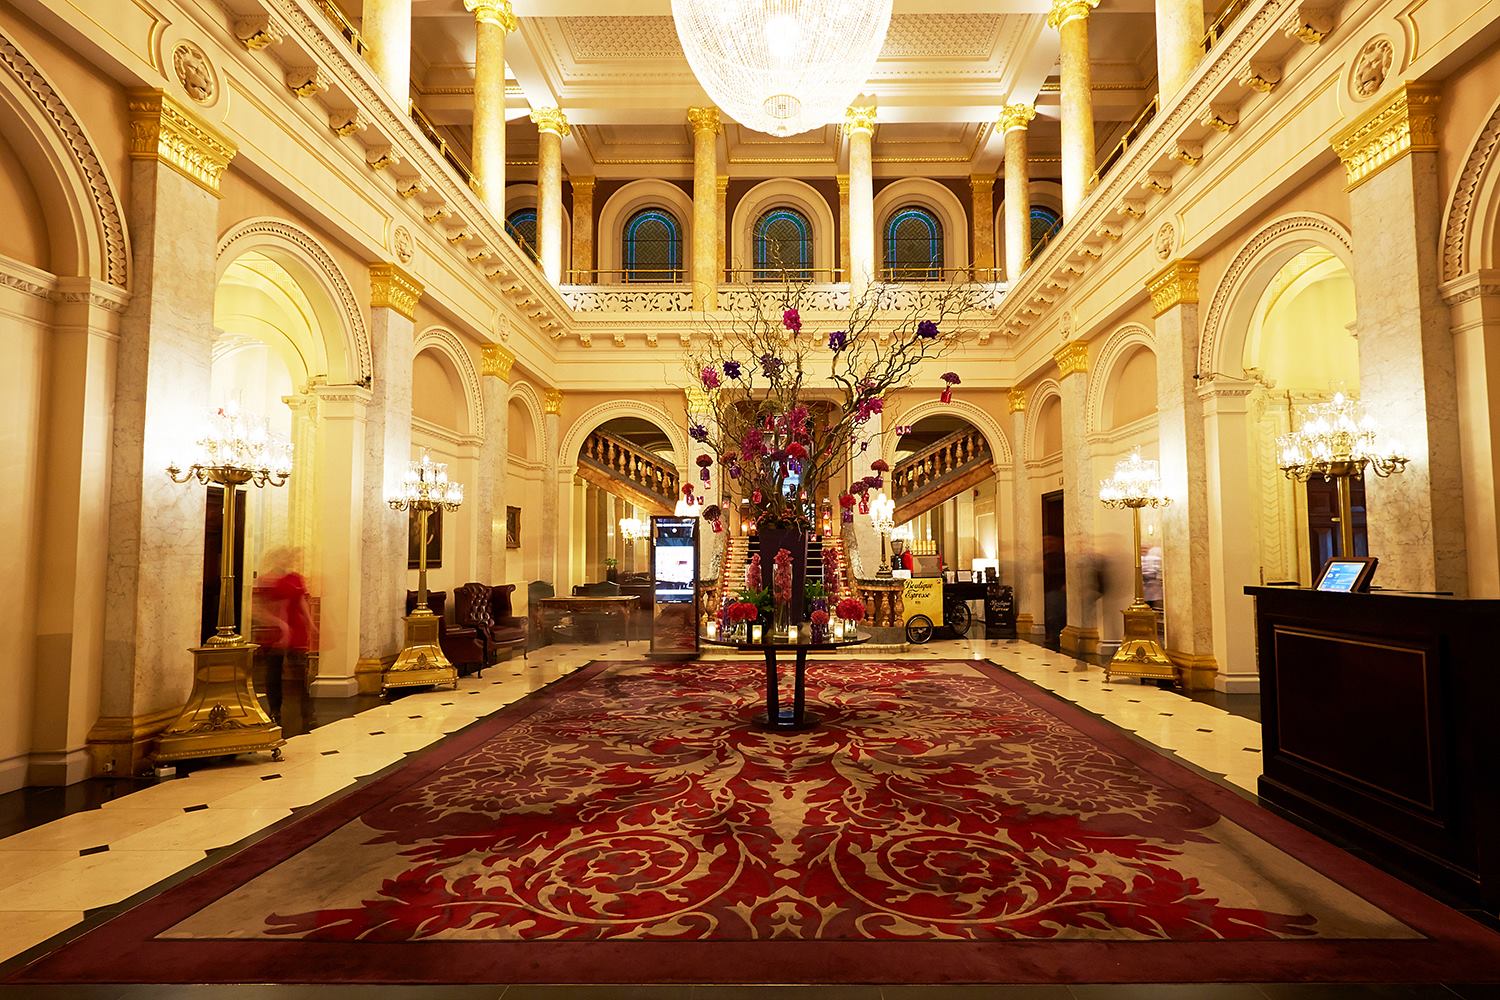 Lobby of The Clermont Victoria, with a huge white crystal chandelier hanging in the middle